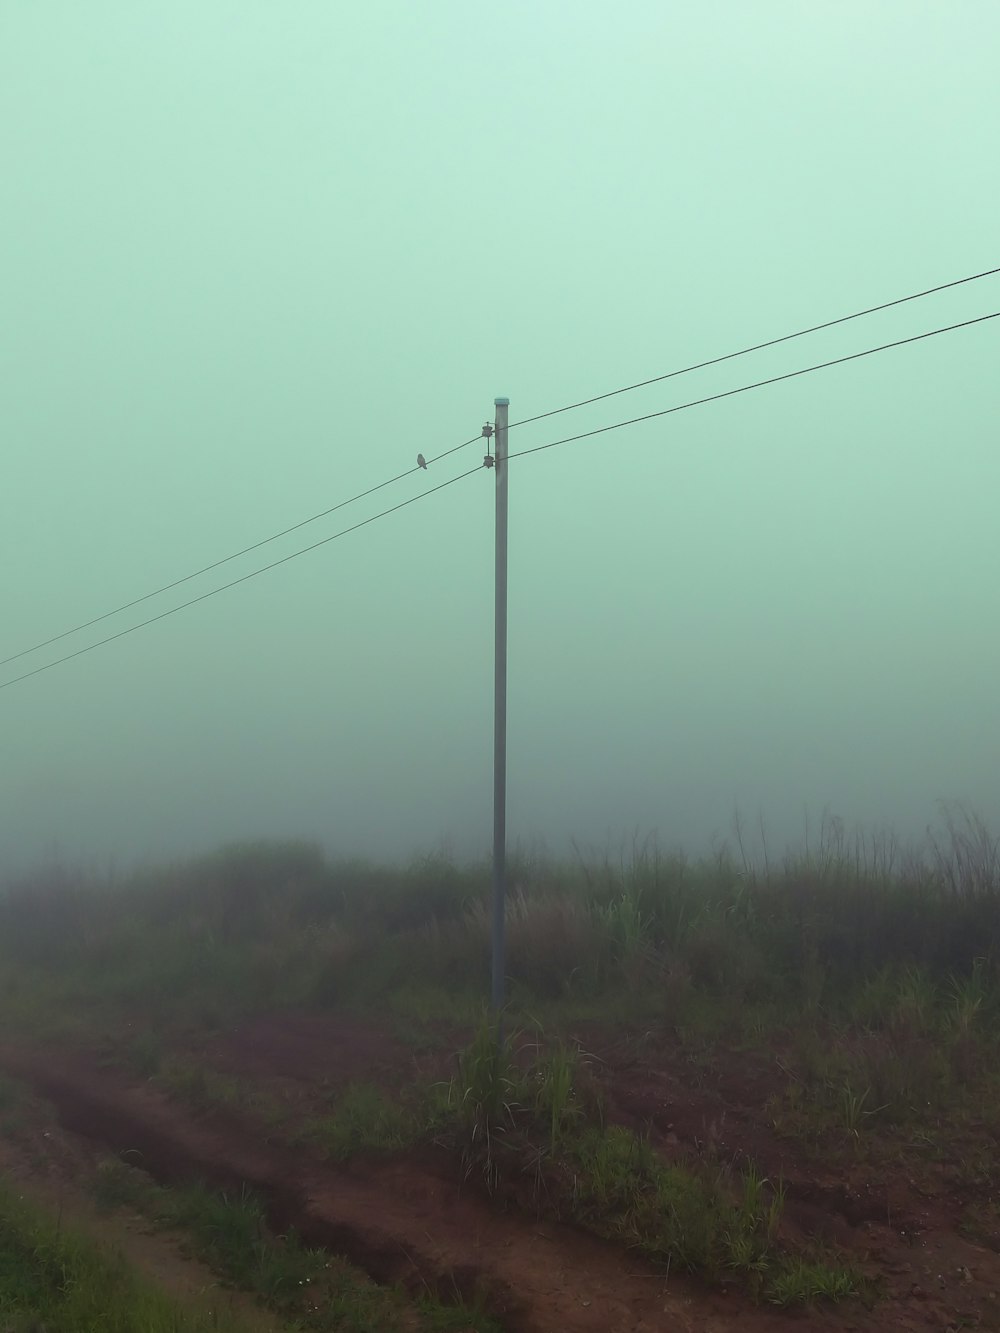 a foggy field with a telephone pole in the foreground